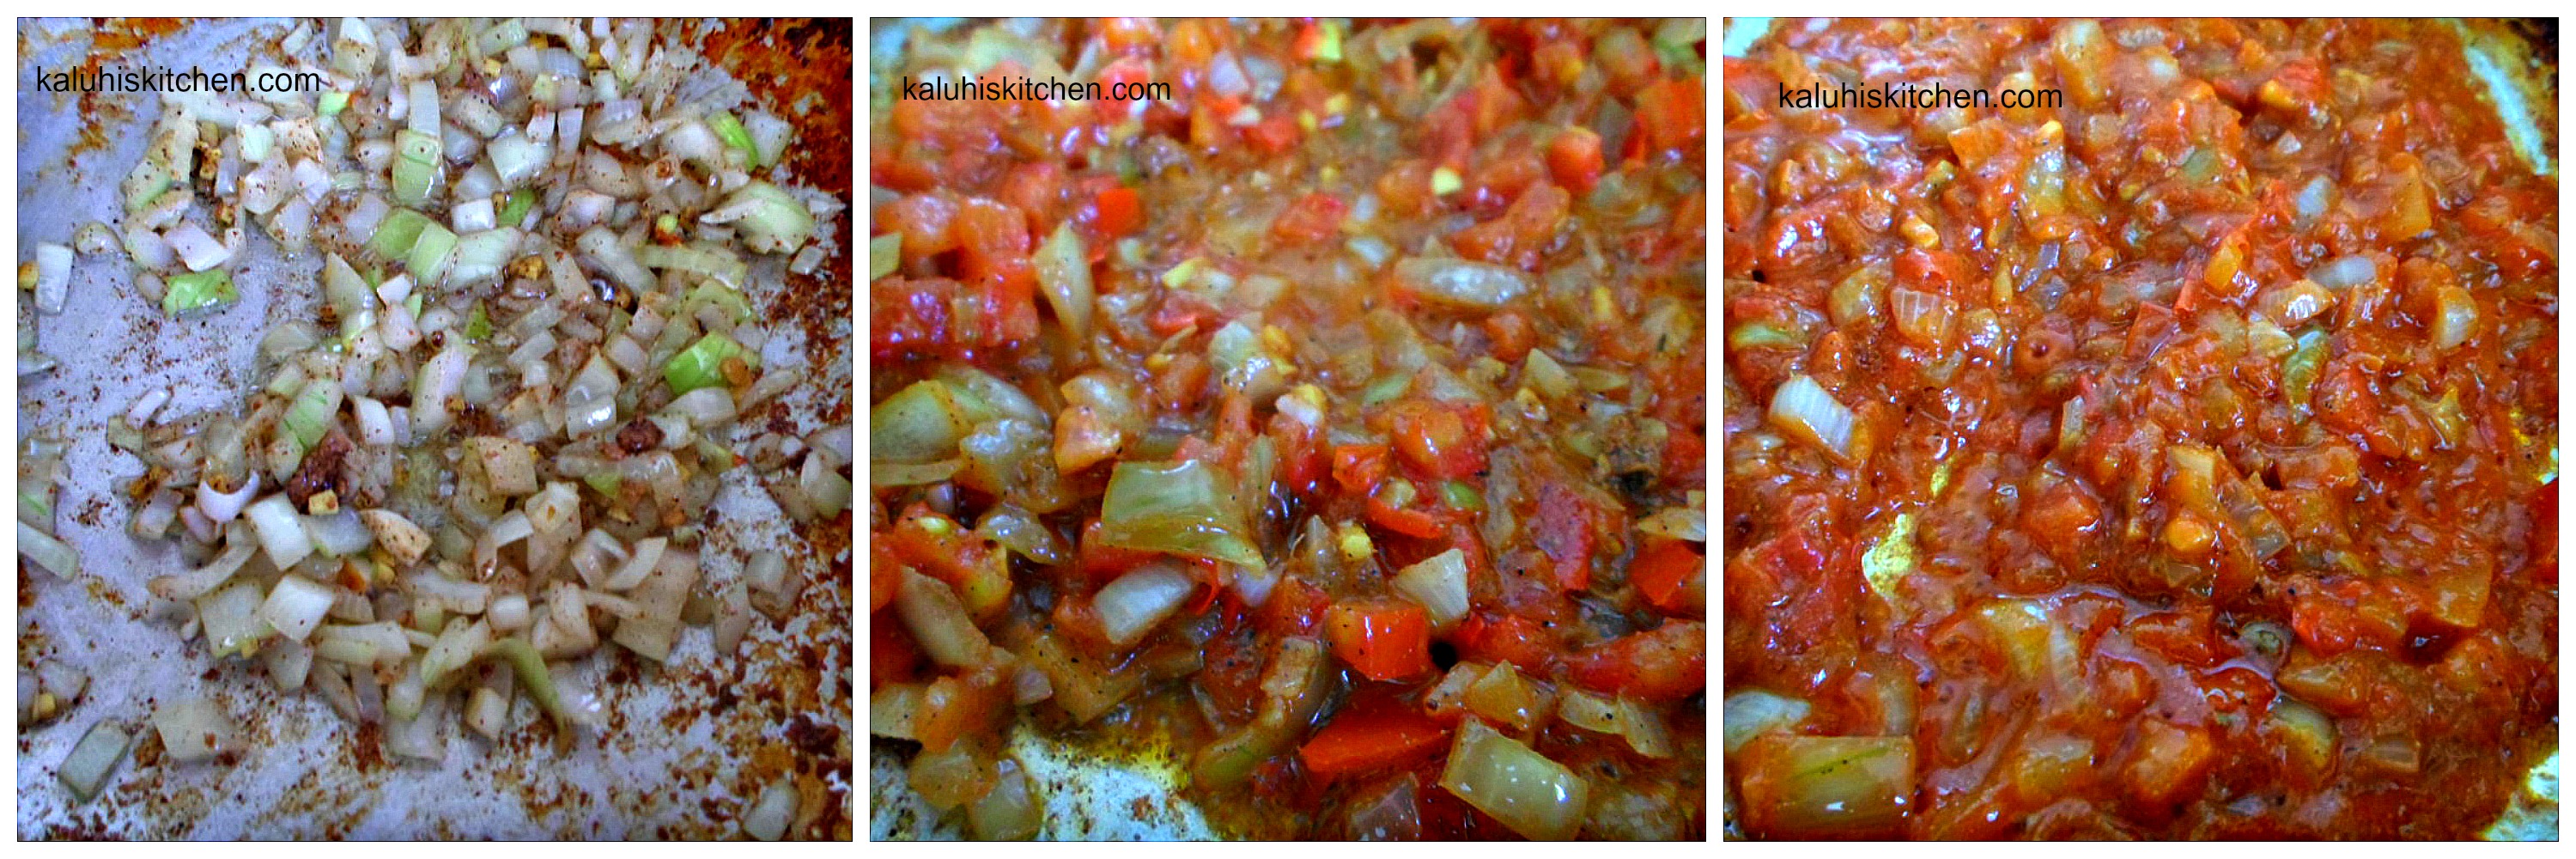 sauteed onions, tomato reduction and tomato paste for thickness